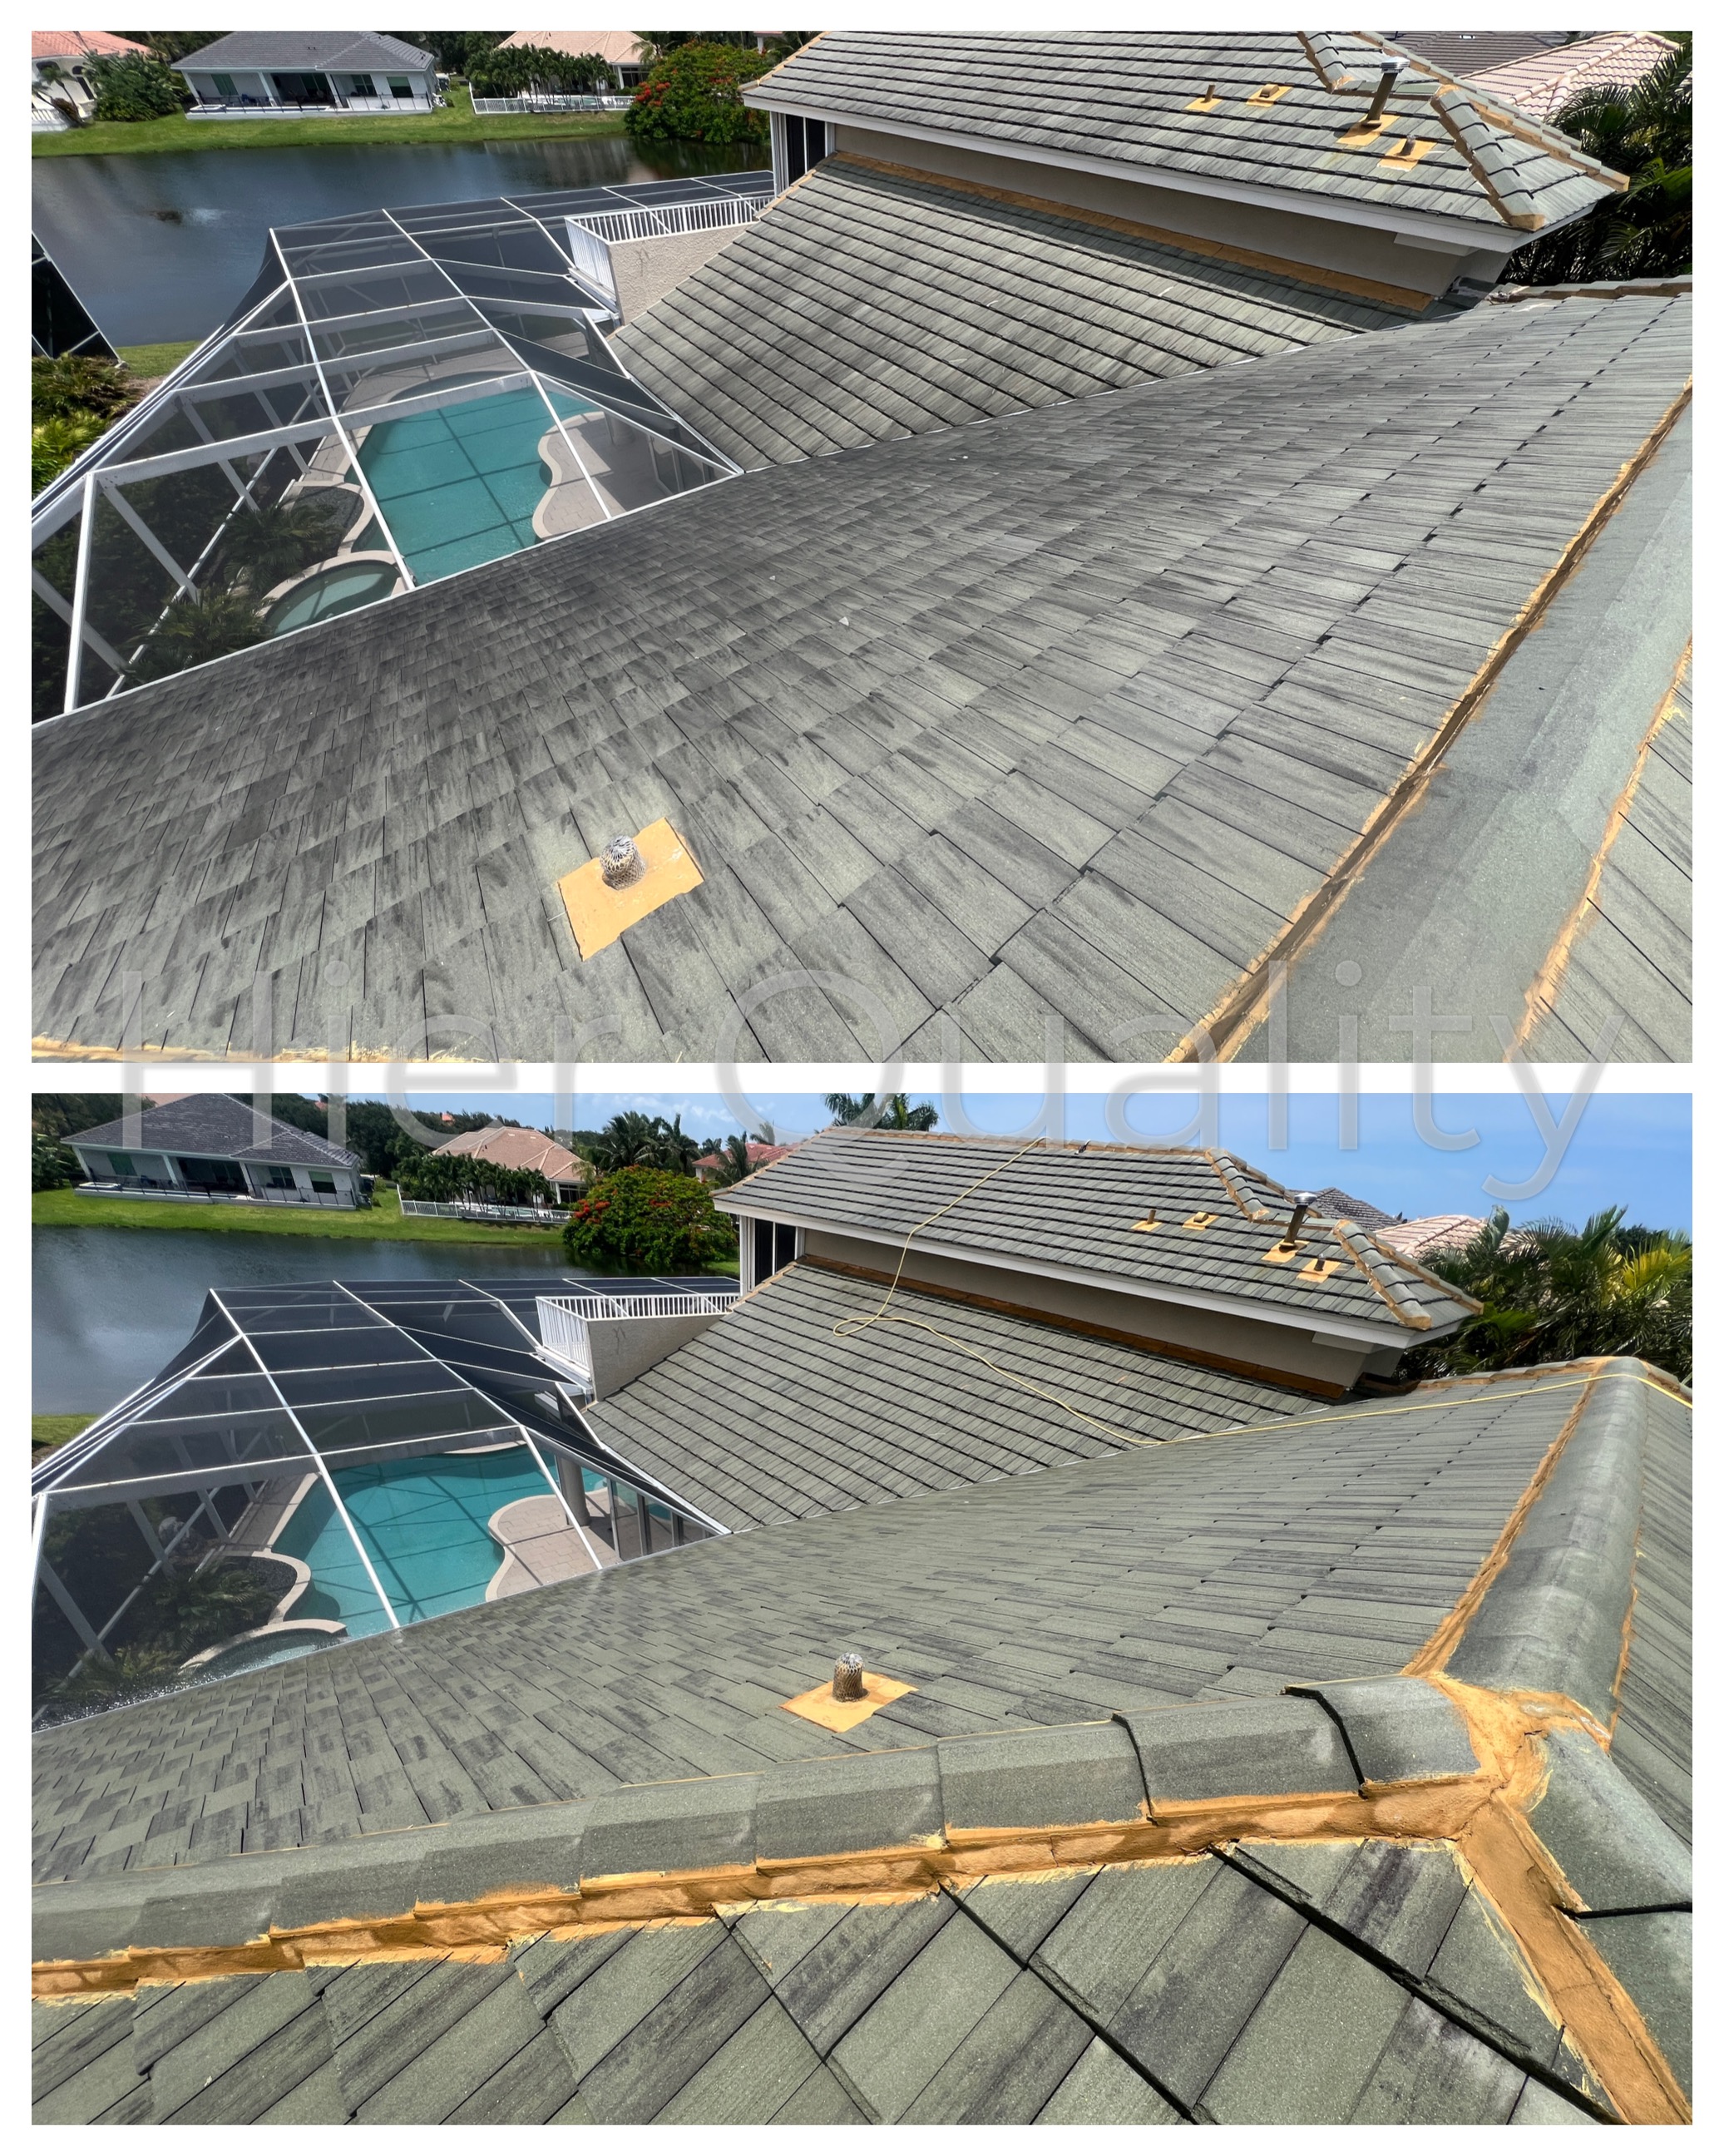 Roof Cleaning in Melbourne Florida with Fantastic Results!